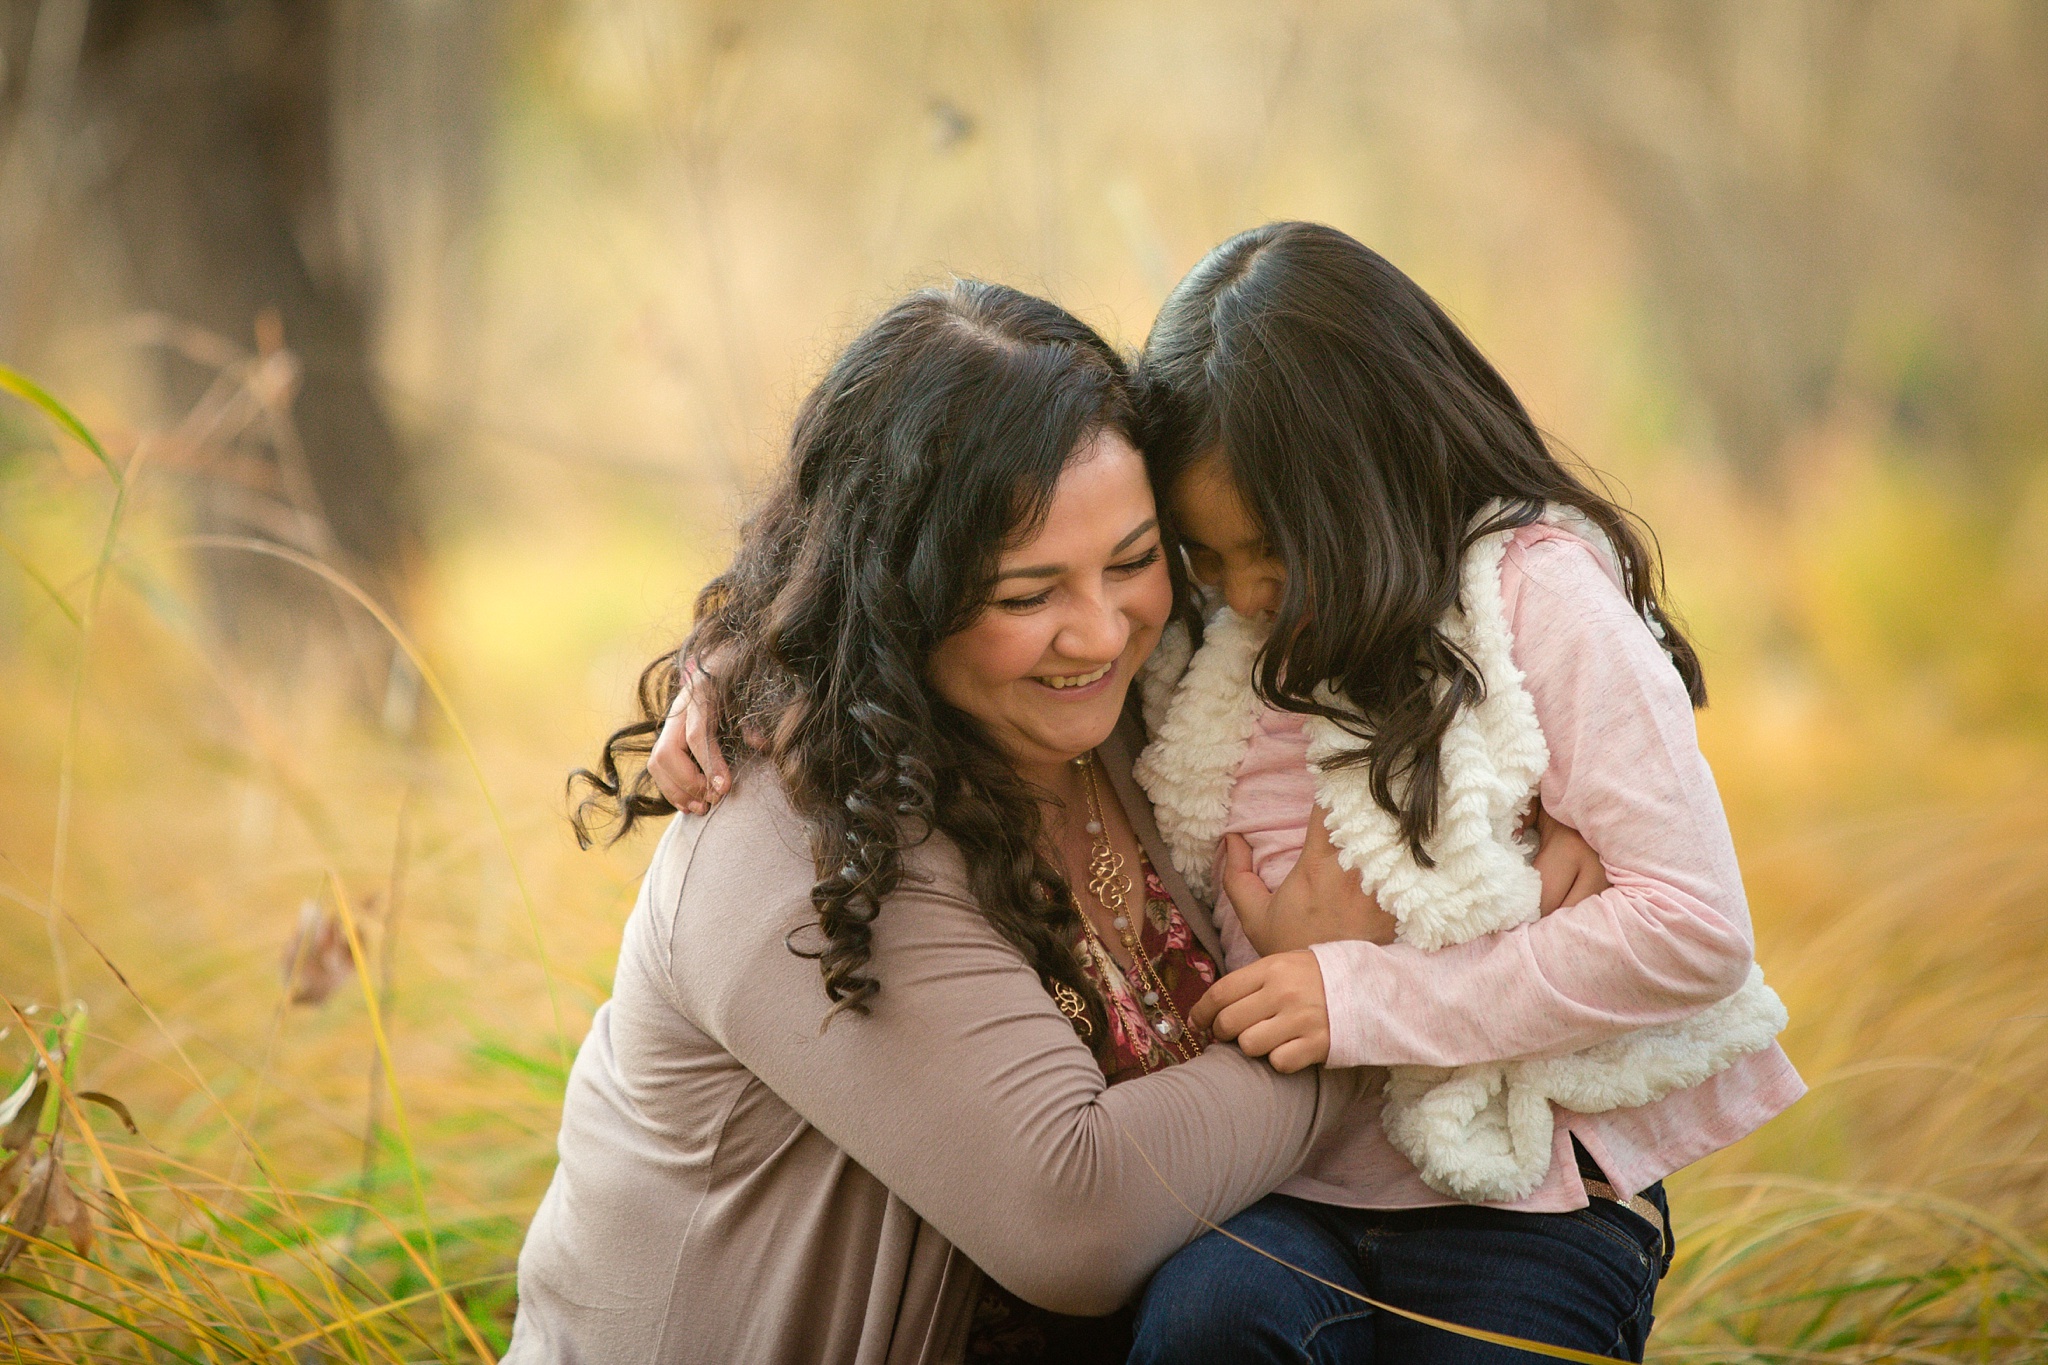 Mother & daughter hugging during fall family portraits. The Aguayo Family’s Fall Family Photo Session at Golden Ponds Nature Area by Colorado Family Photographer, Jennifer Garza. Golden Ponds Nature Area Family Photographer, Golden Ponds Nature Area, Golden Ponds, Golden Ponds Family Photographer, Longmont Family Photography, Longmont Family Photographer, Colorado Family Photos, Colorado Family Photographer, Colorado Fall Photos, Fall Photos